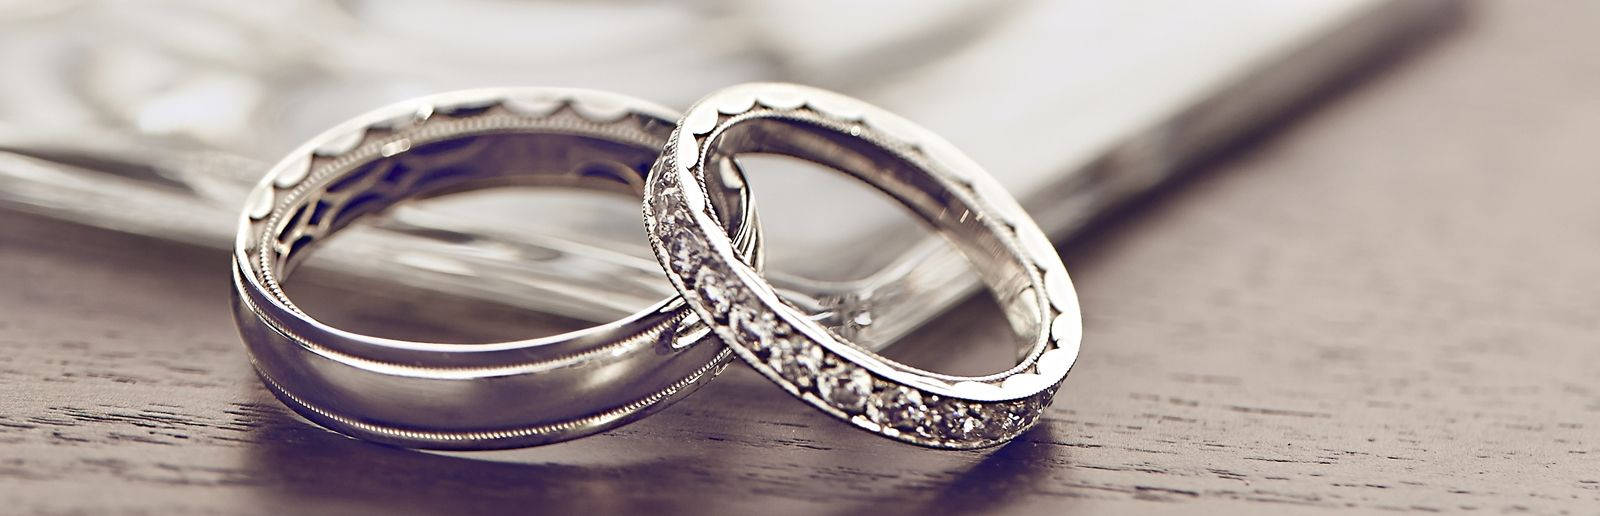 Wedding Rings 1600X516 Wallpaper and Background Image